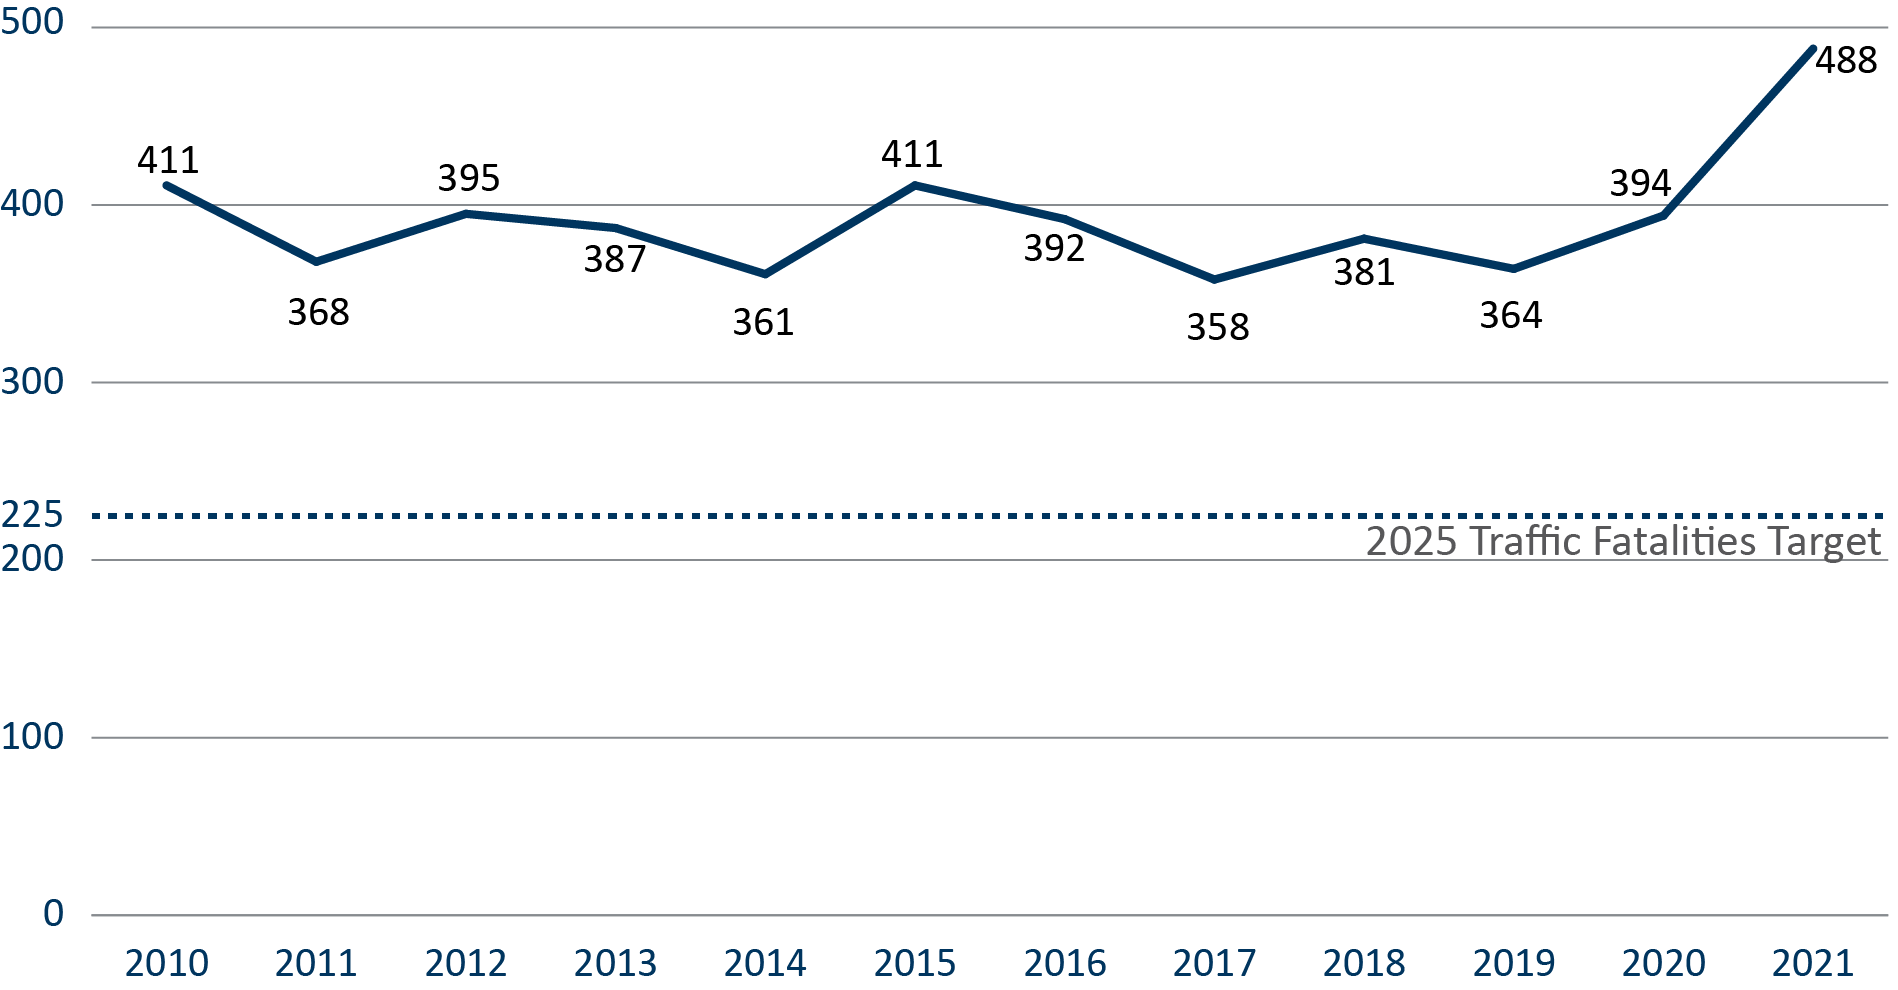 Chart shows traffic fatalities on Minnesota roads from 2010 to 2021. In 2010 there were 411 traffic fatalities. In 2017 there was 358 traffic fatalities. In 2021 there was 488 traffic fatalities on Minnesota roads. There is a traffic fatalities target of 225 by 2025.